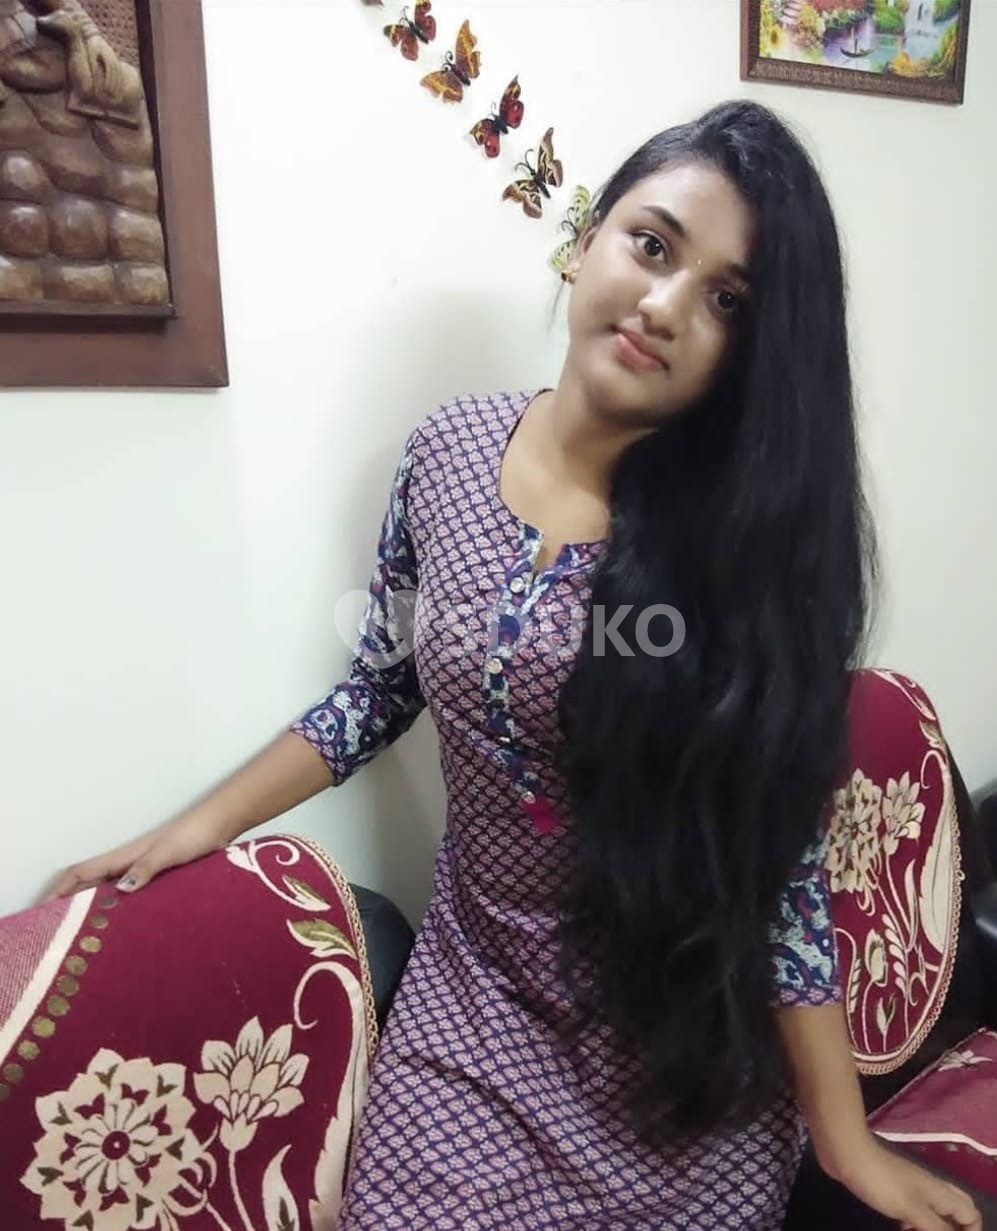 SECUNDERABAD 💯% FULLY SATISFACTION AND DOORSTEP INCALL OUTCALL SERVICE AVAILABLE SAFE AND SECURE .